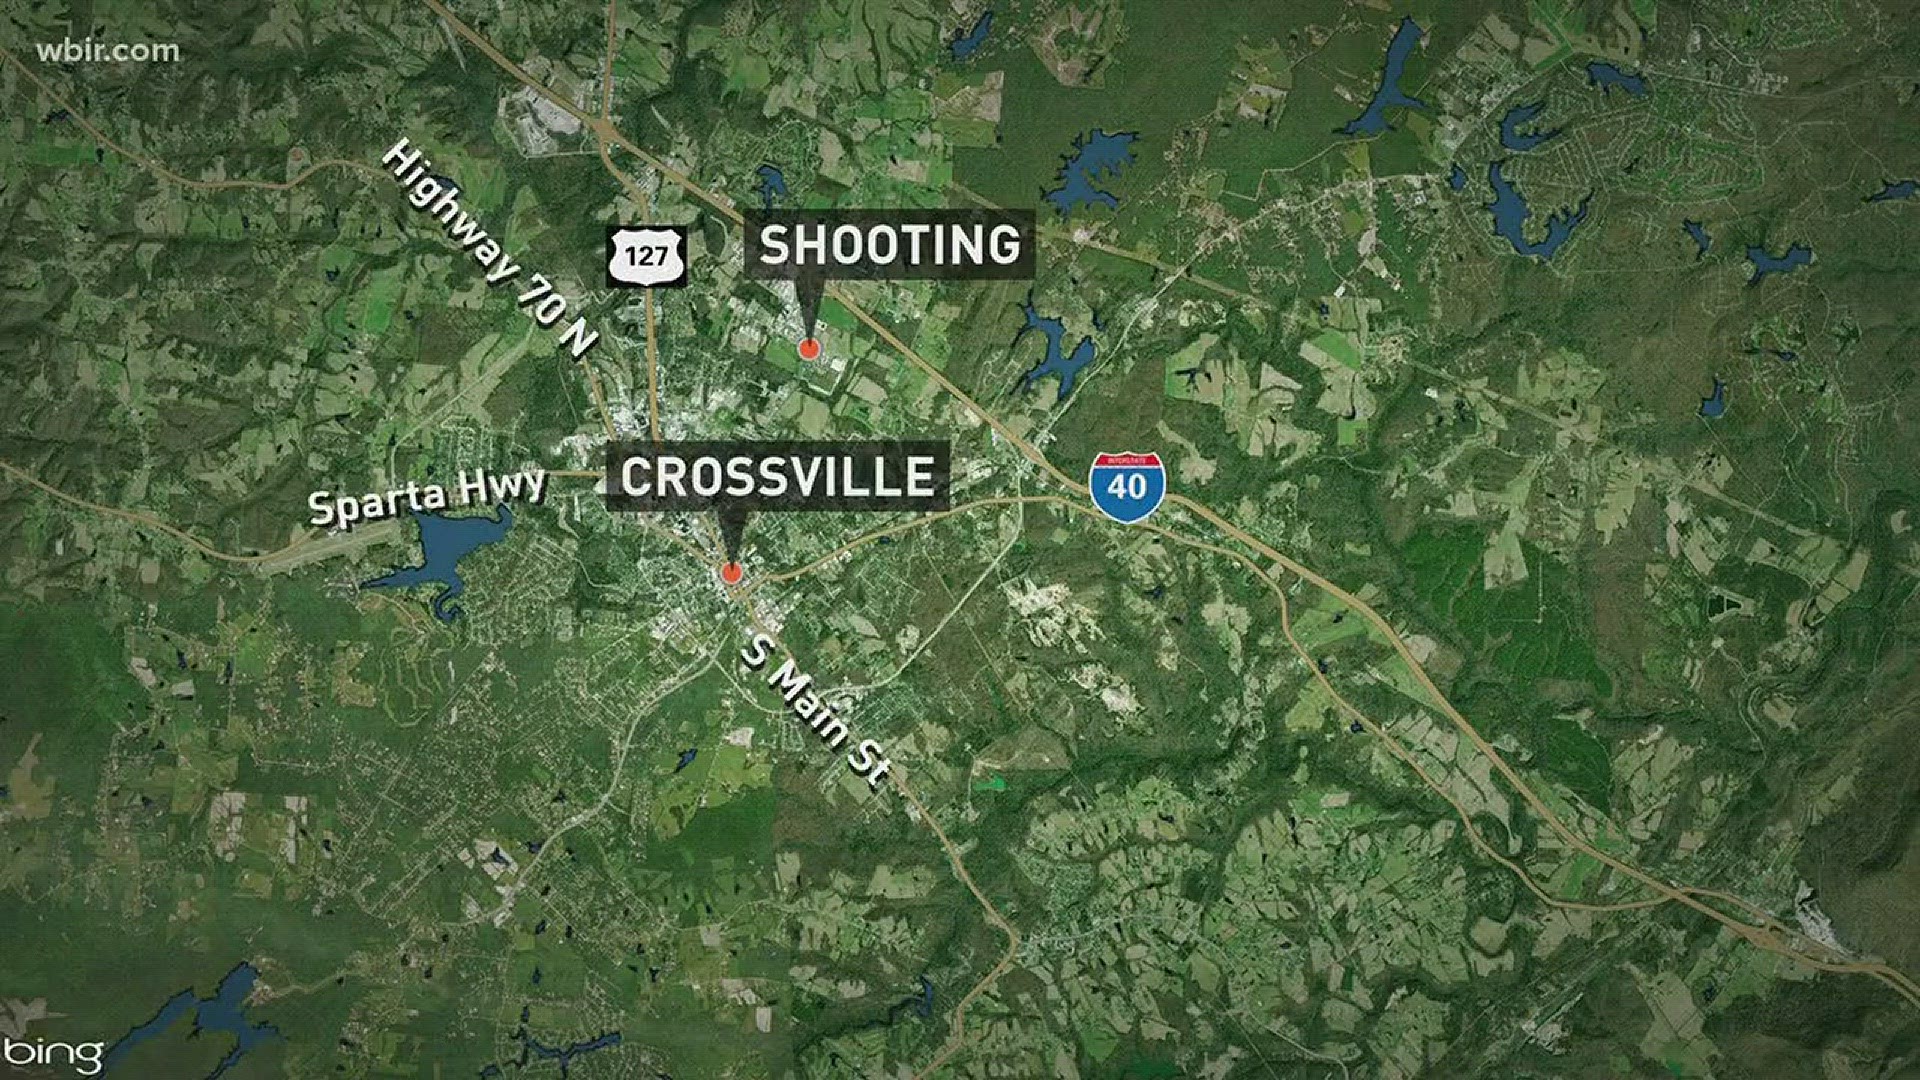 Three people were wounded in the shooting.